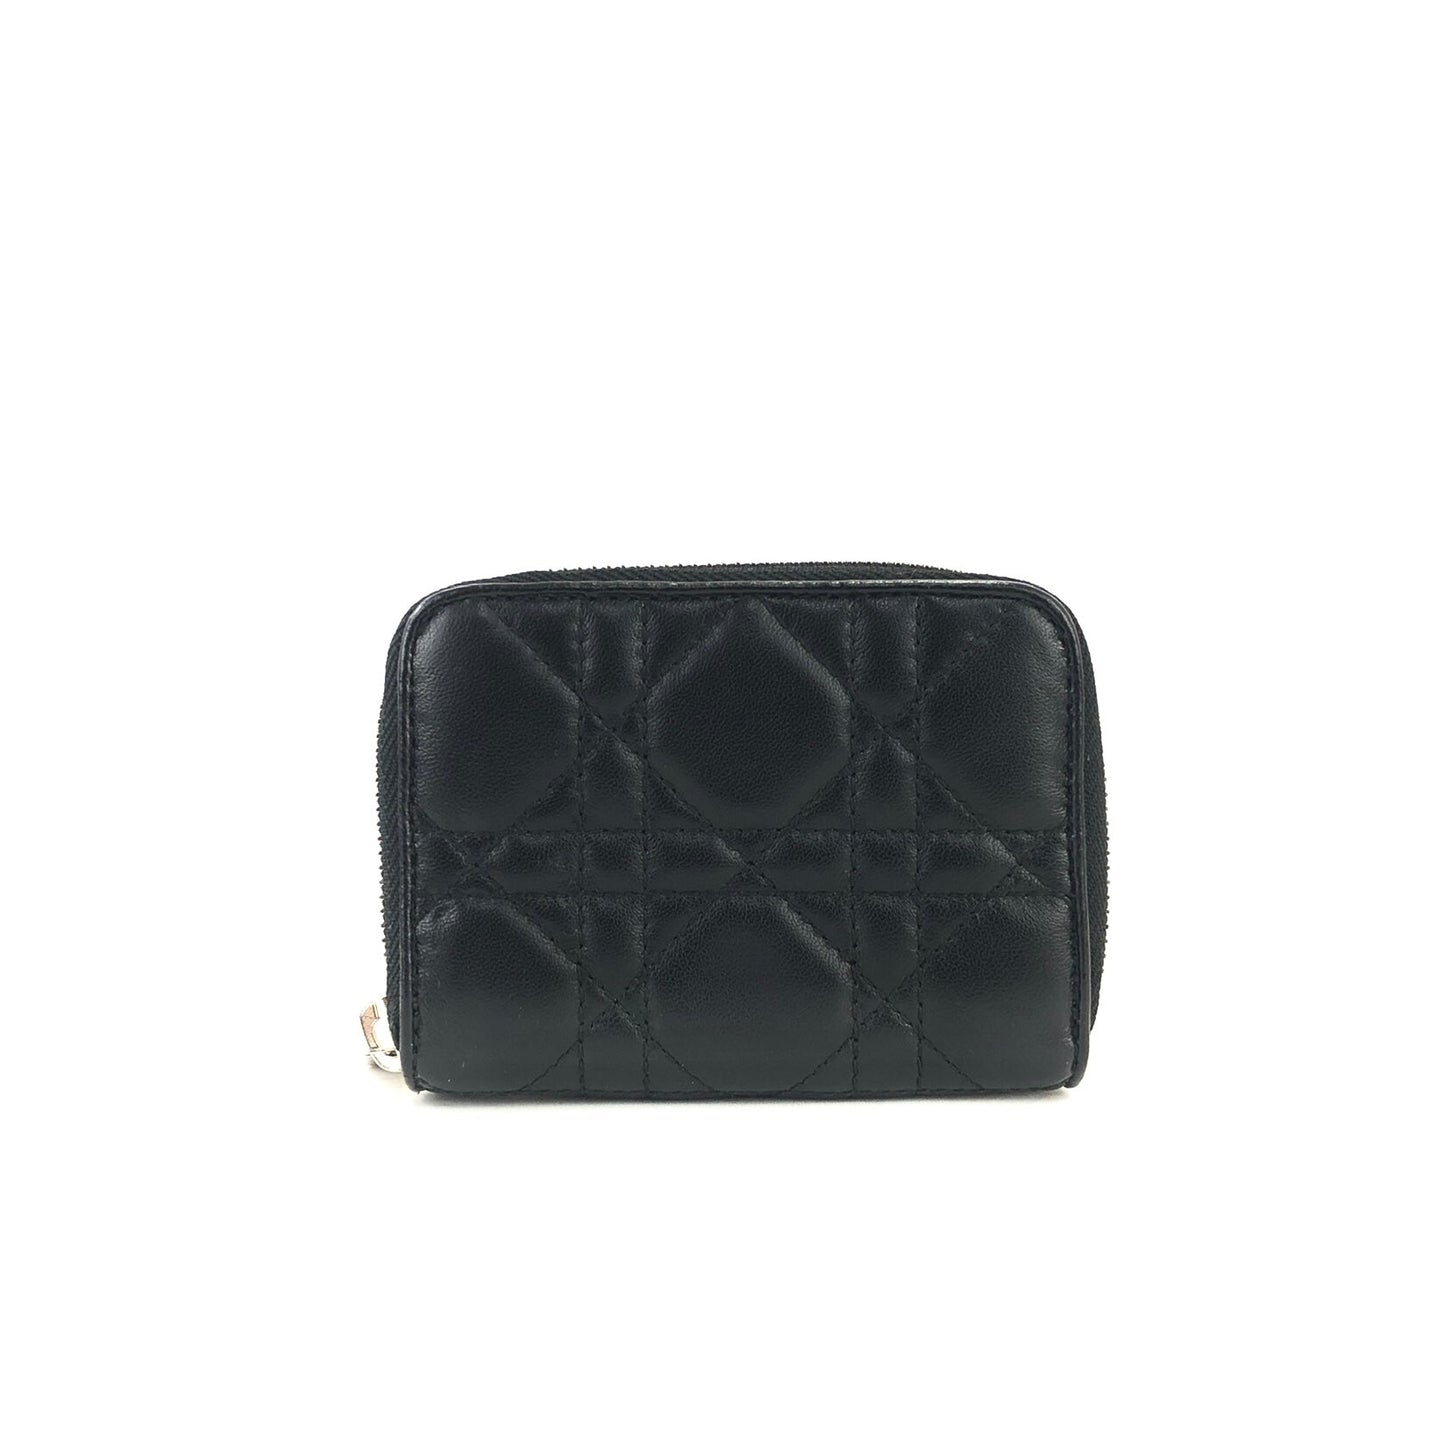 Christian Dior Lady Dior Cannage Compact Wallet Black ry74mz